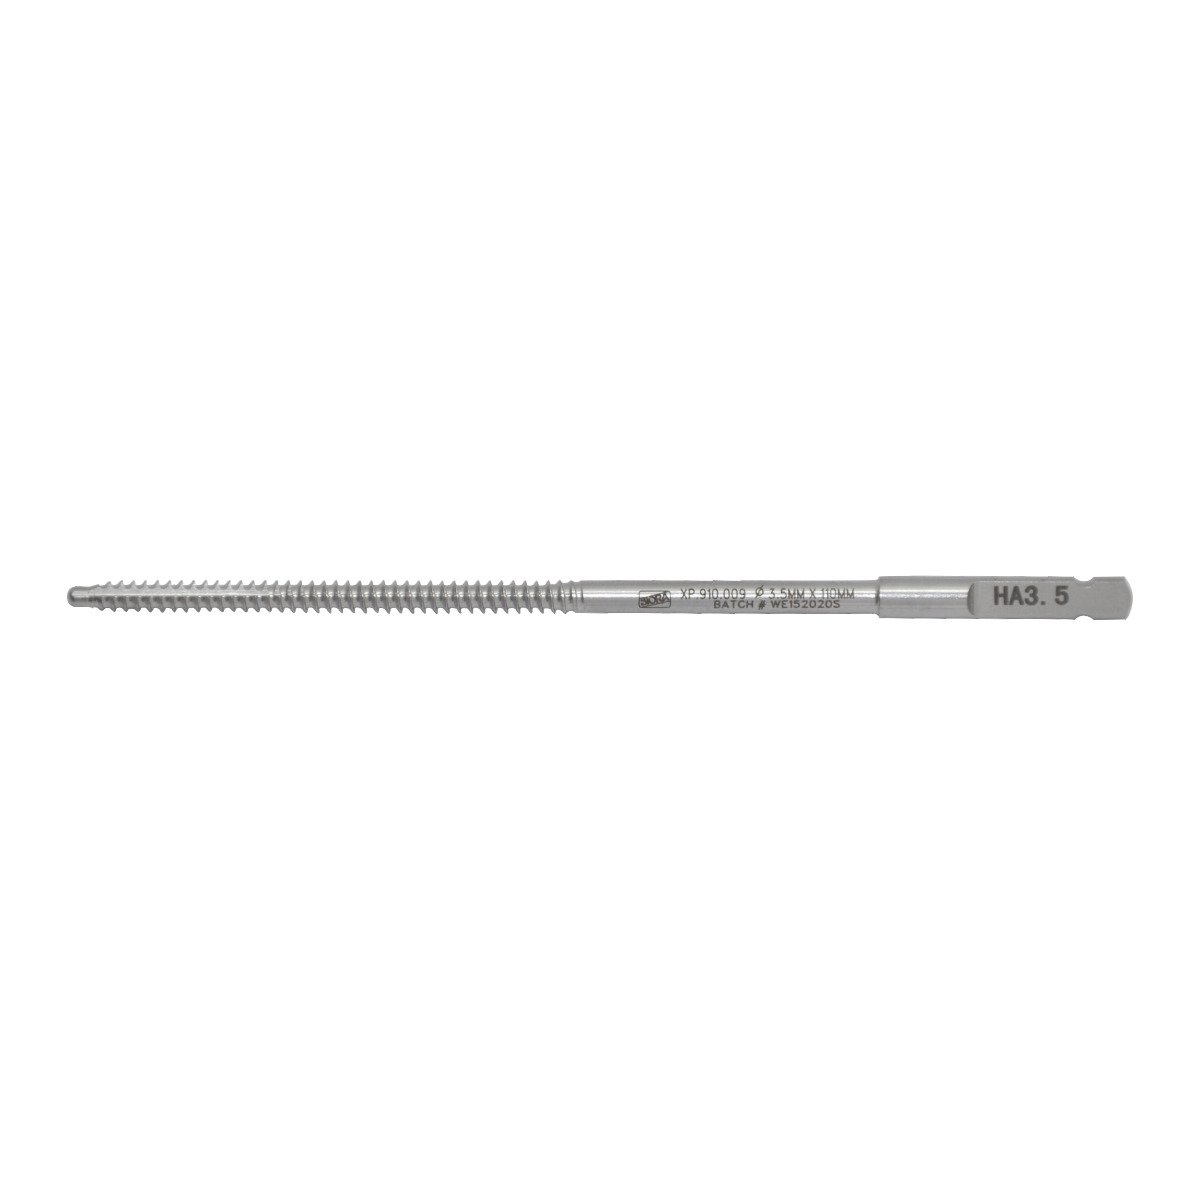 Bone Tap – Quick Coupling End Dia. 3.5mm, Thread Length 50mm, Total Length 110mm